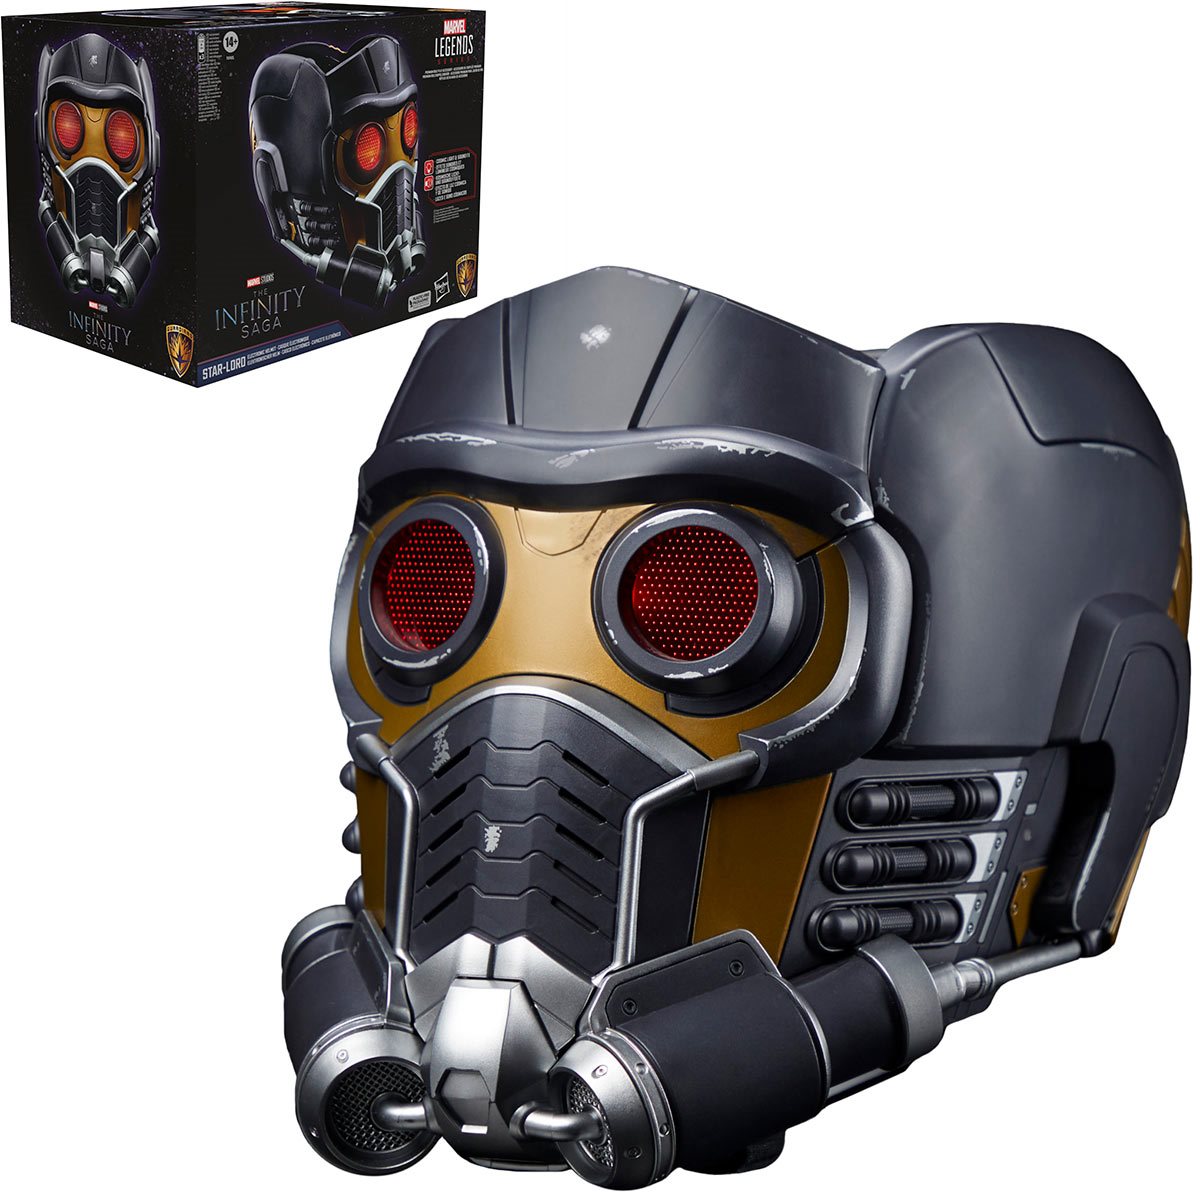 Marvel Legends Series Star-Lord Electronic Role Play Helmet